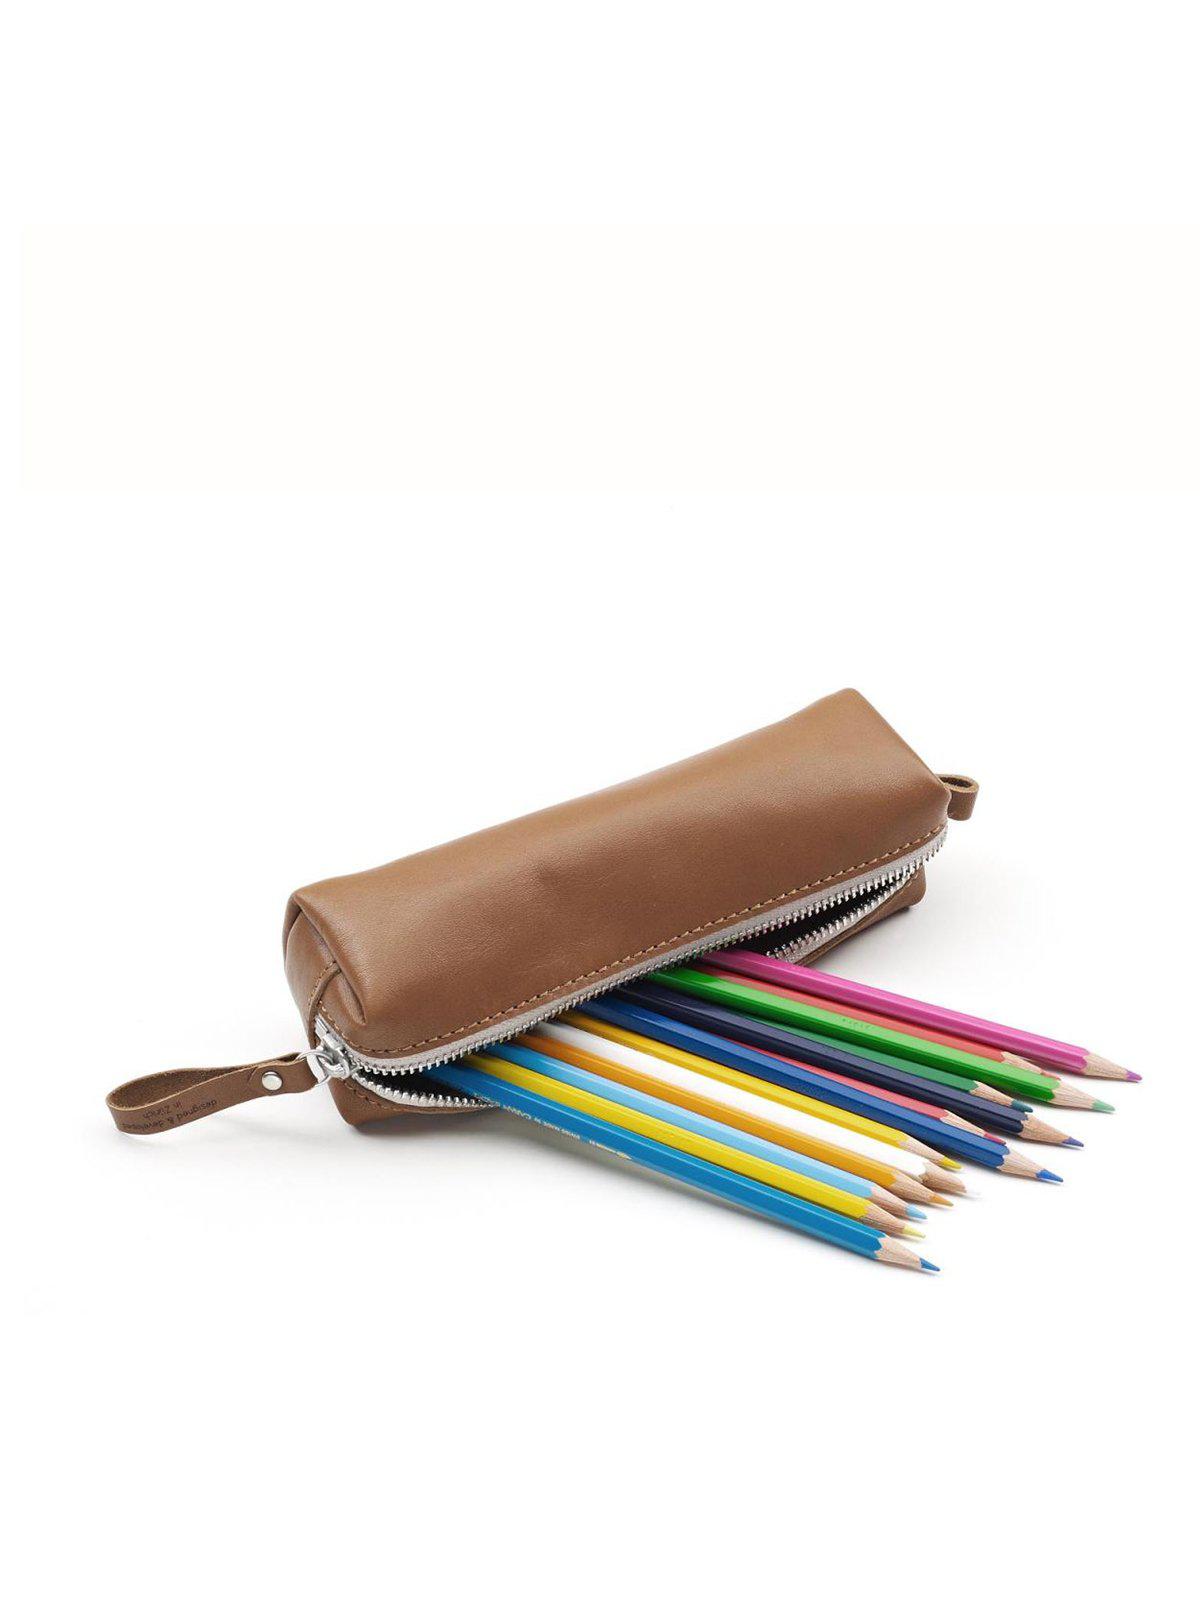 Qwstion Pencil Case Brown Leather Canvas - MORE by Morello Indonesia